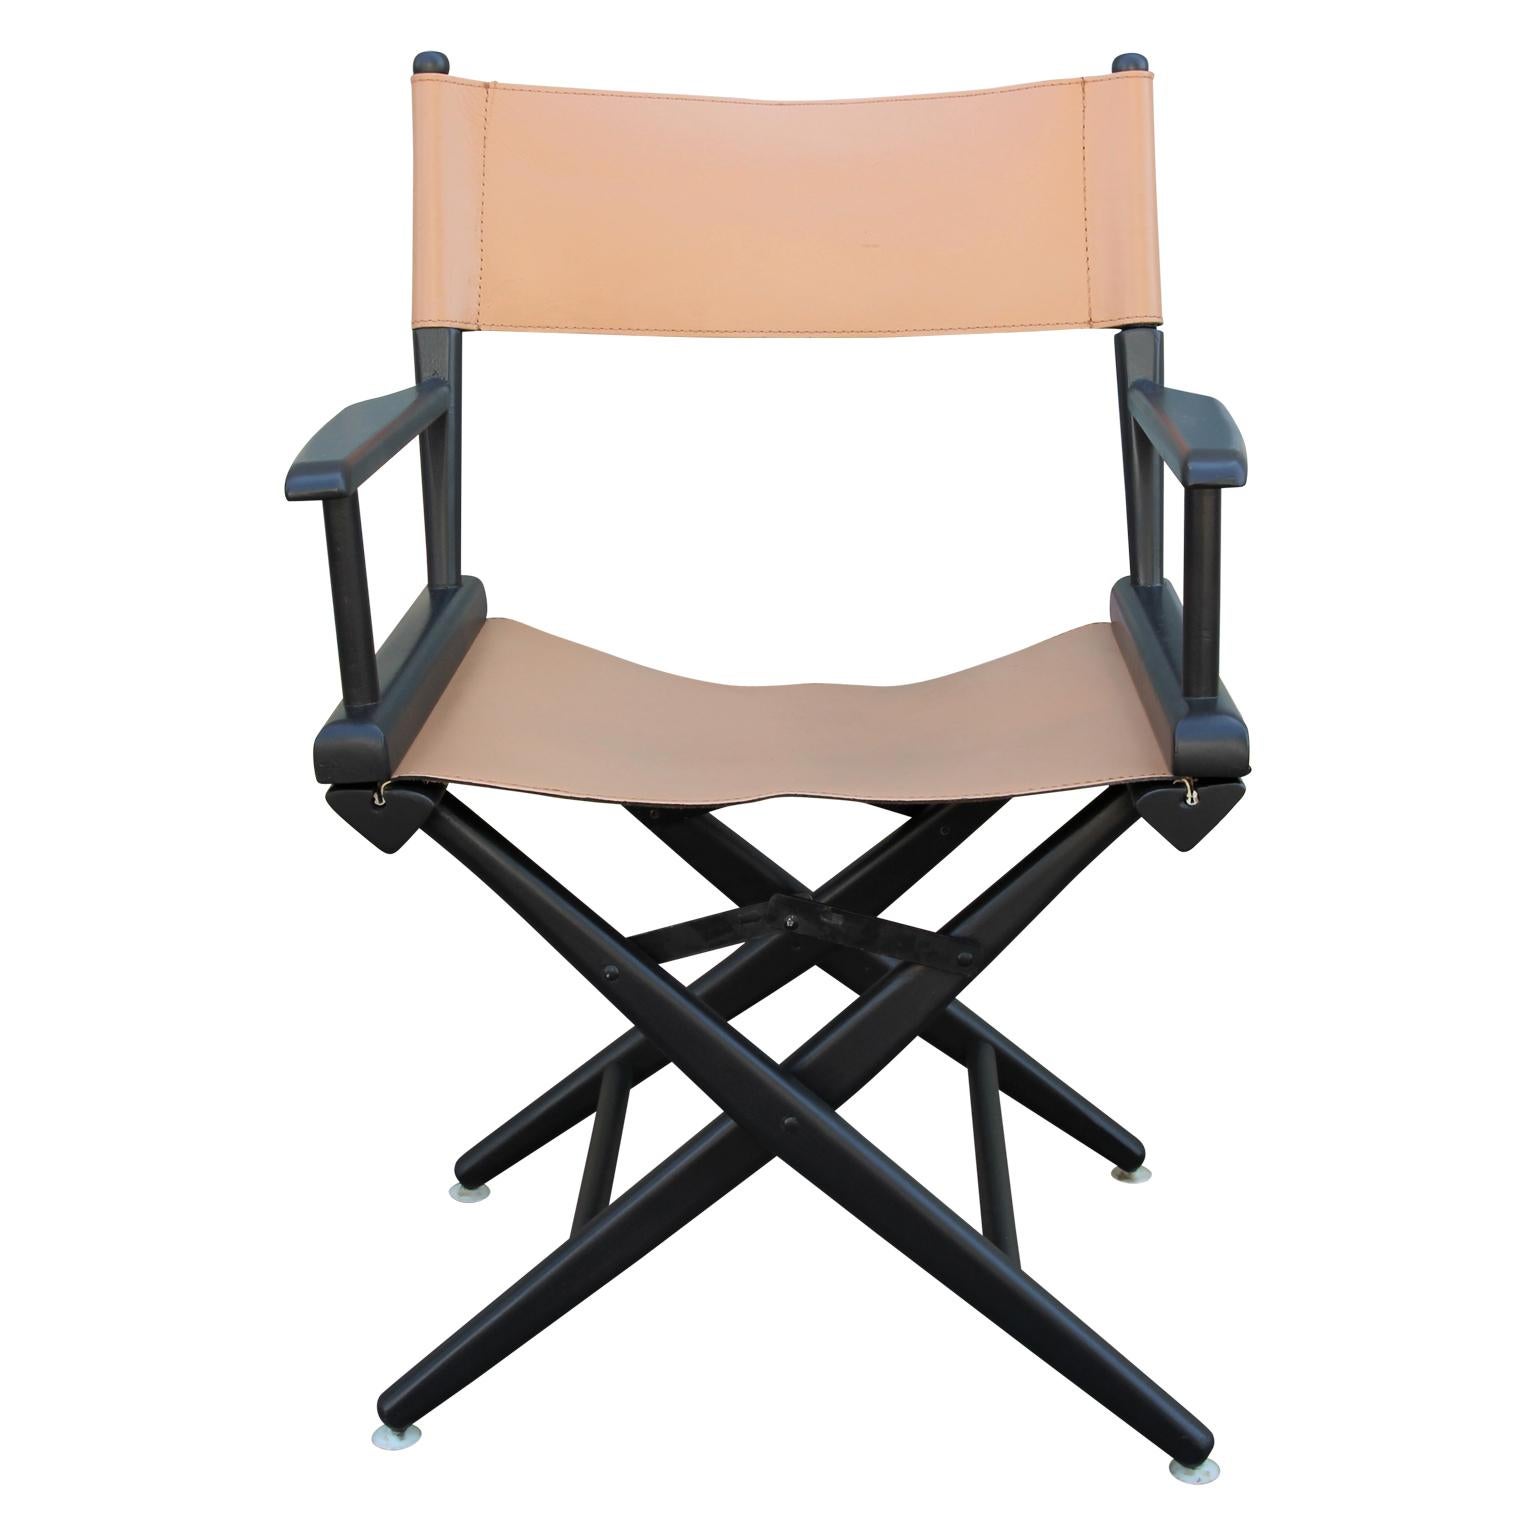 Stylish group of six casual folding chairs by the Telescope Folding Furniture Company. 
The wooden frame of each chair is finished in a black patina while the seats are made out of tan leather. Each leather back cover has been refurbished in the